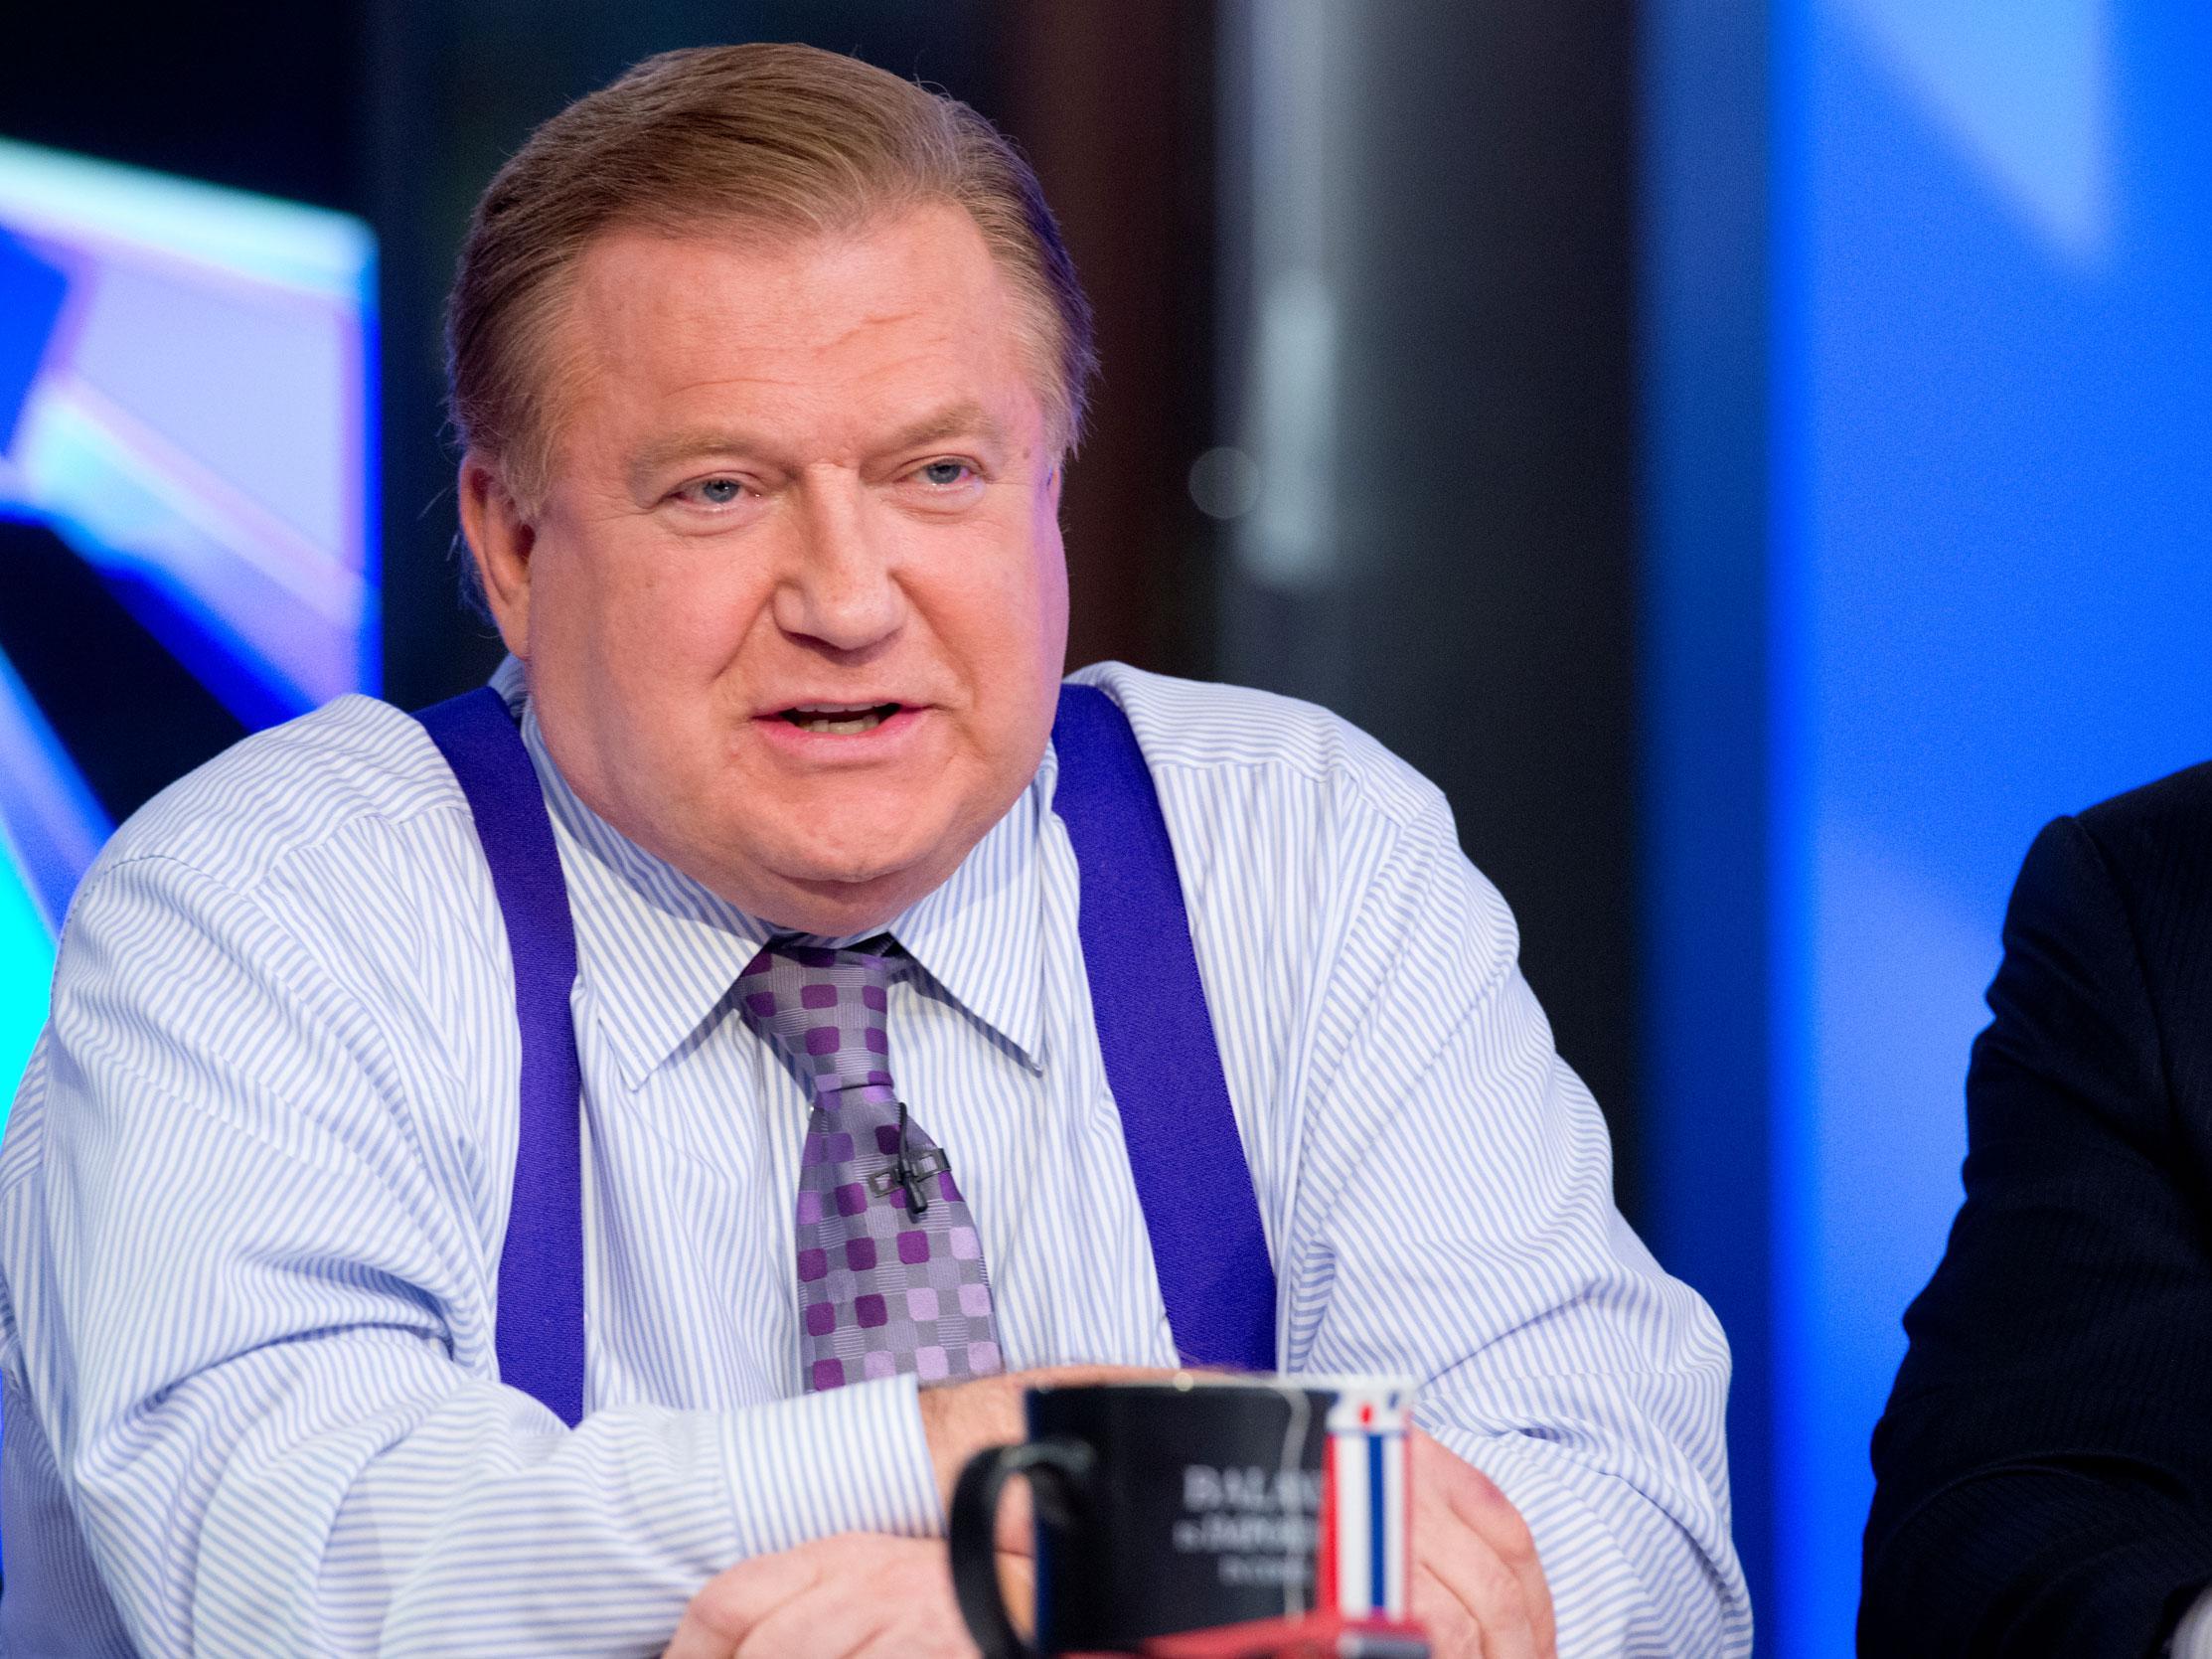 Bob Beckel had a history of making controversial comments